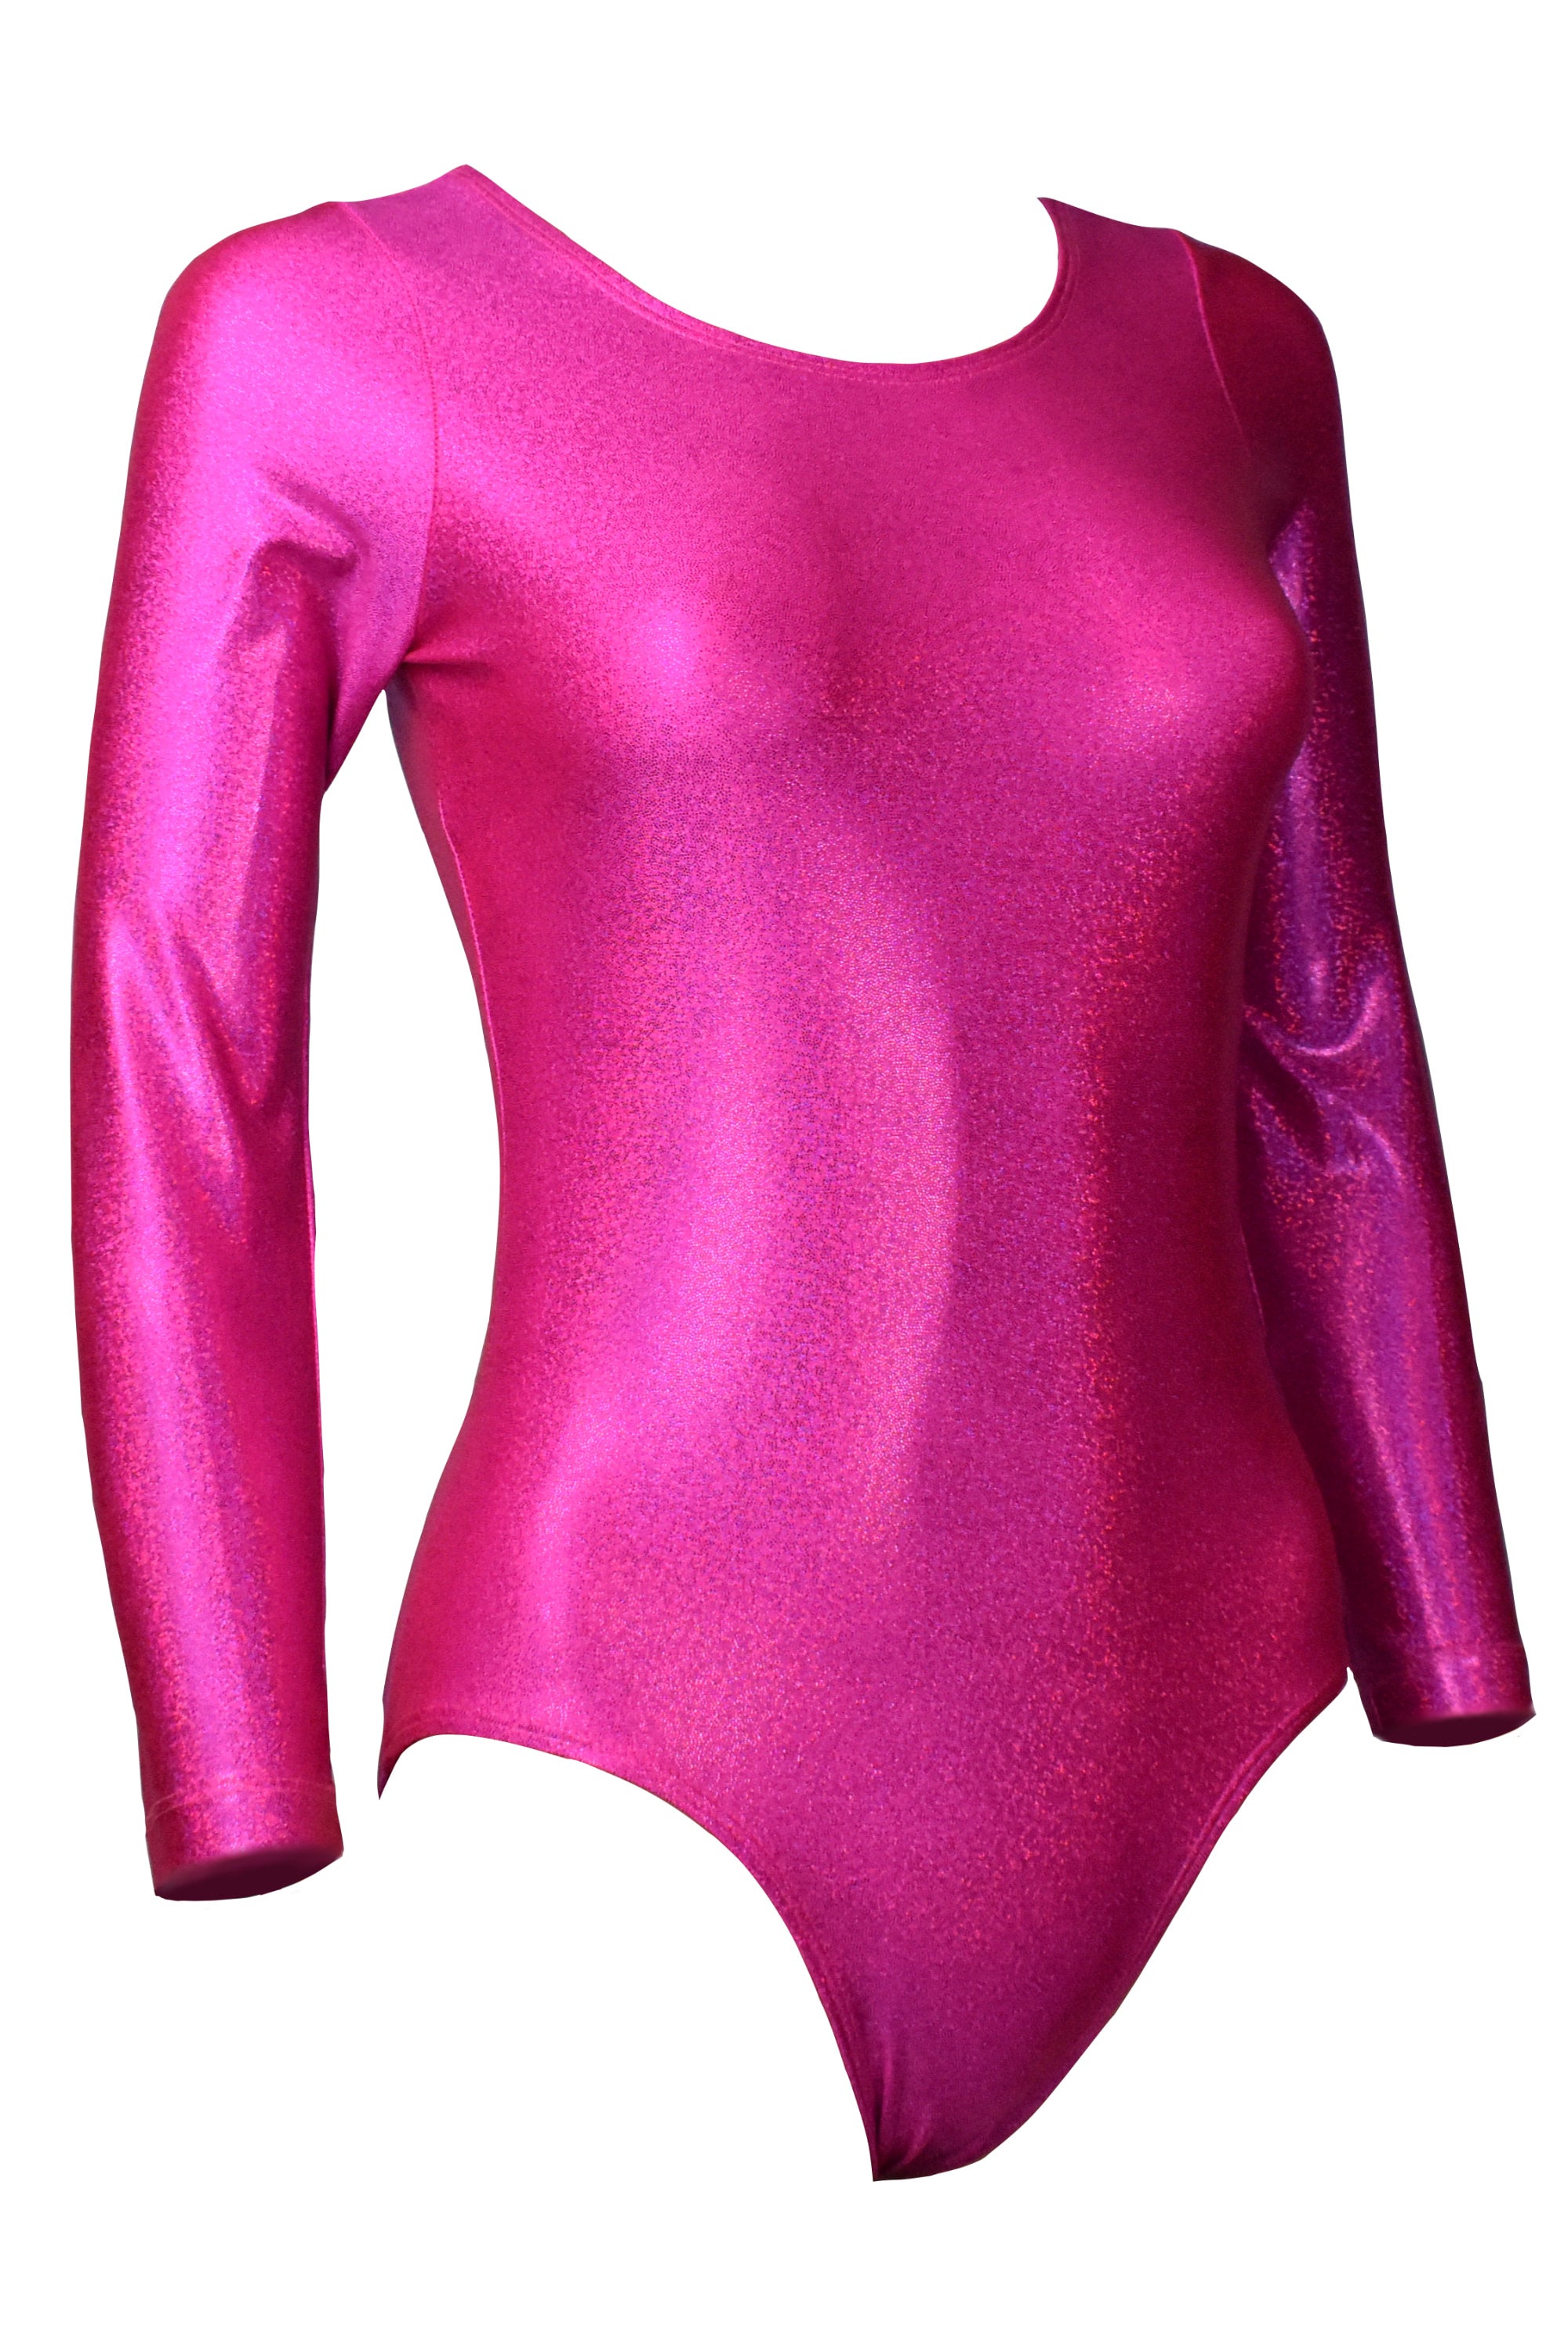 Hot Pink Sparkly Jewels Spandex, Hologram Fabric